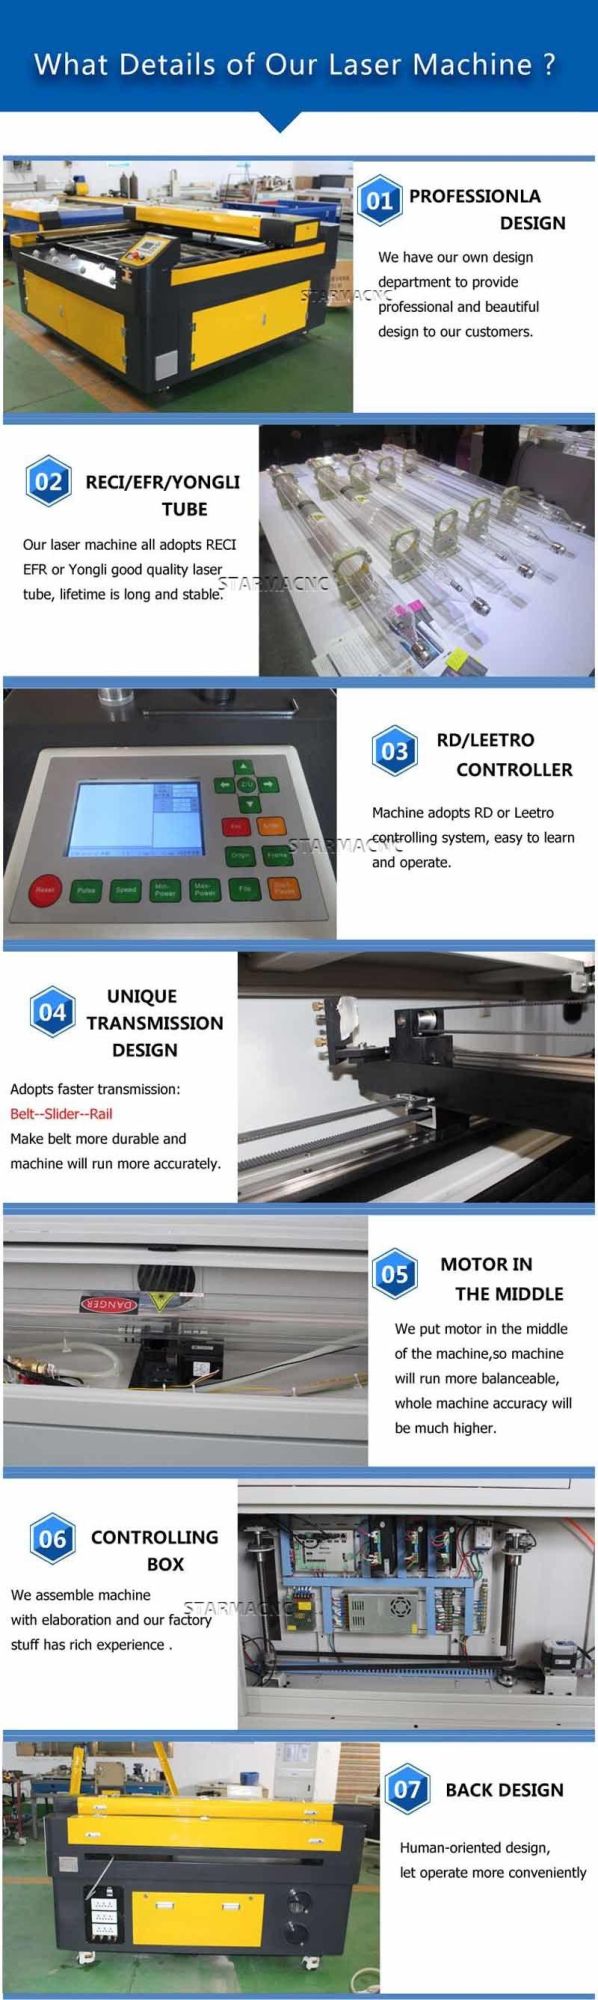 Yongli Laser Tube 220W Top Quality Laser Cutter Machine for Cutting 15-20mm Acrylic